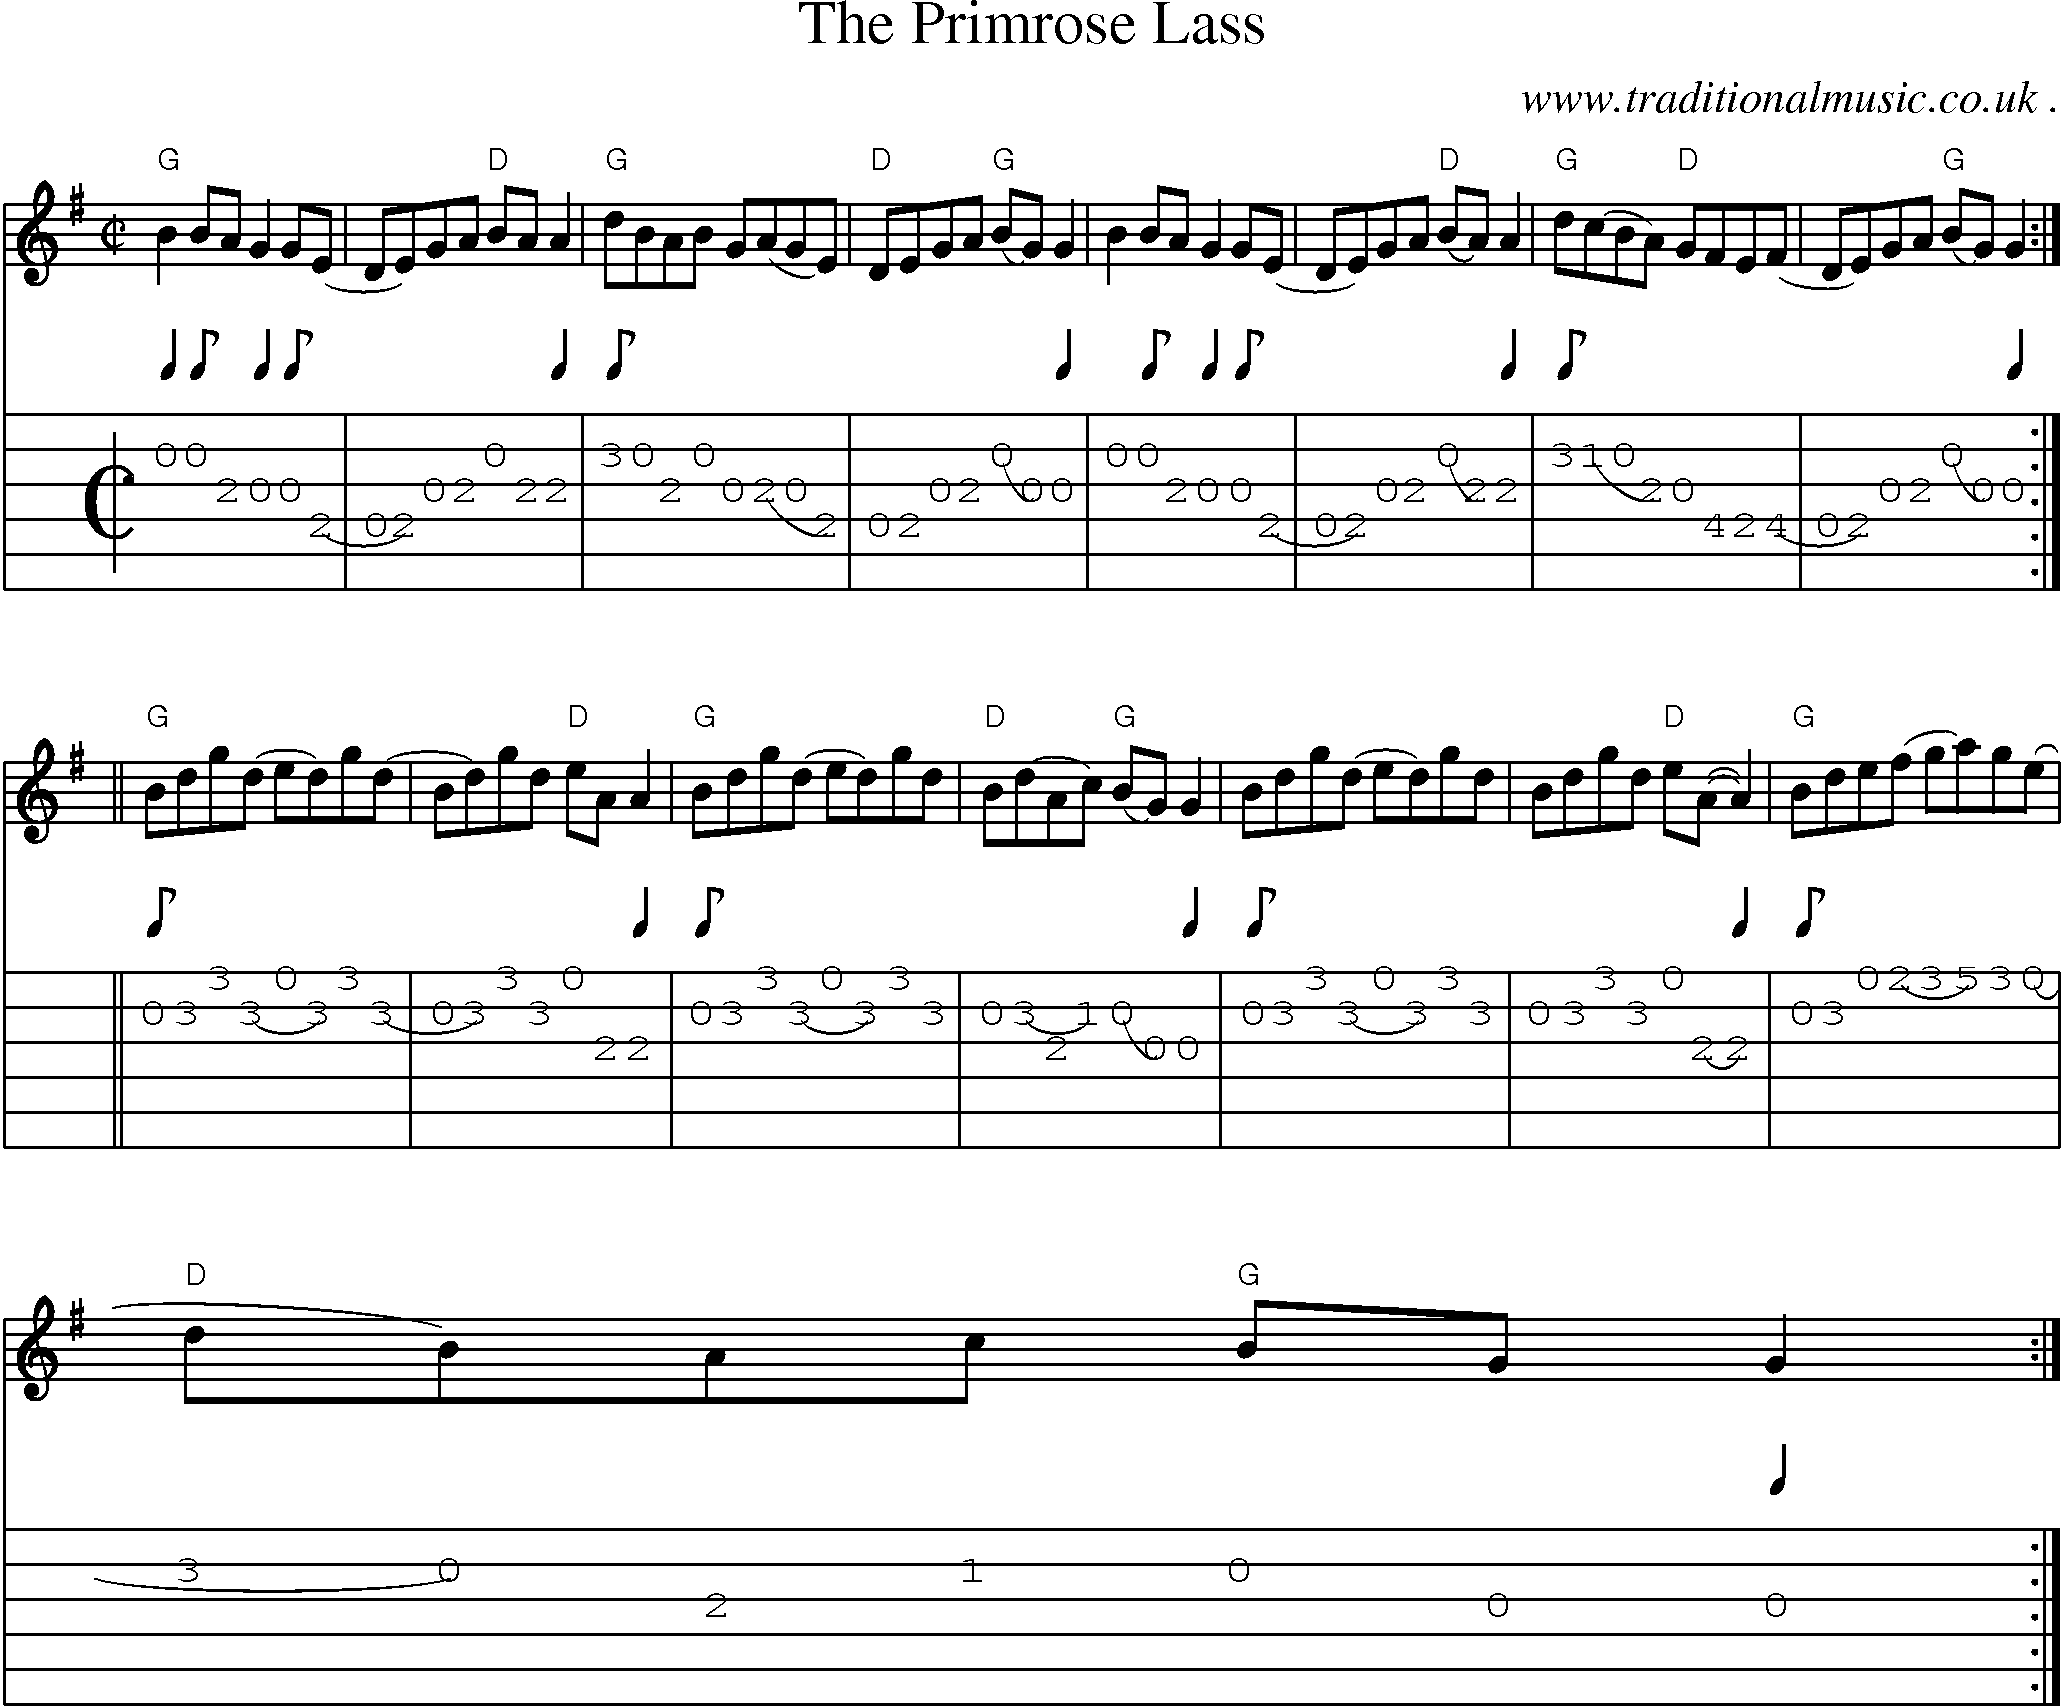 Music Score and Guitar Tabs for The Primrose Lass